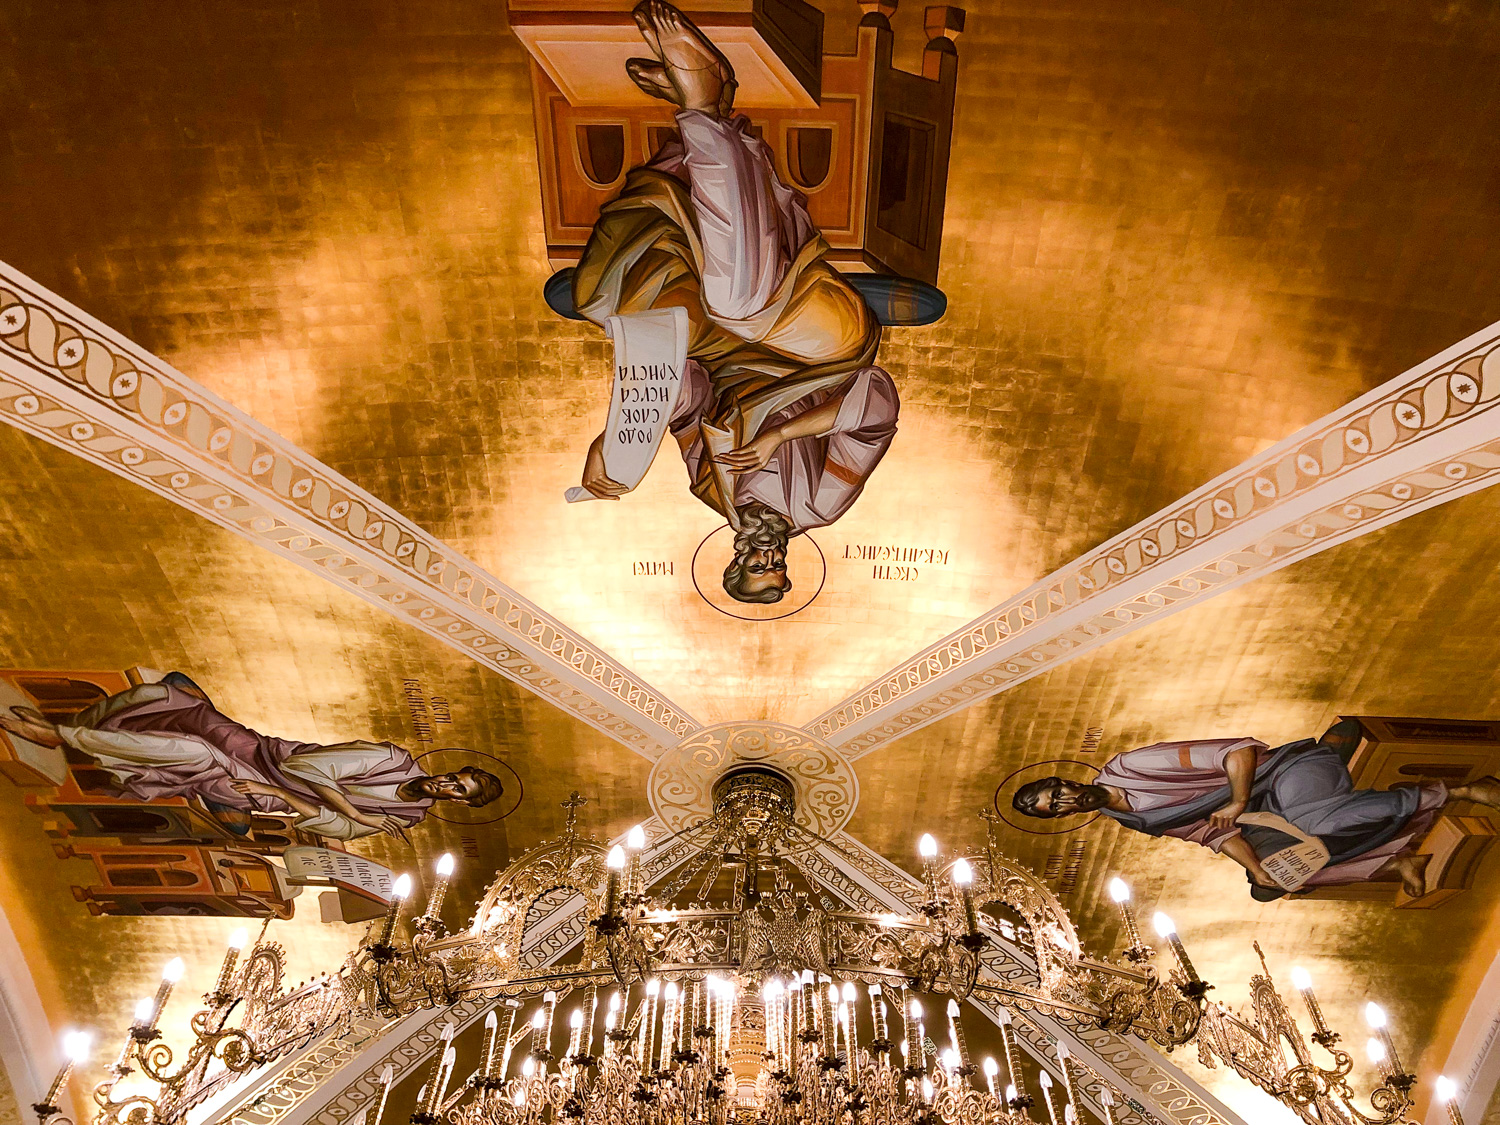 Inside the Church of St. Sava (Eat Me. Drink Me.)